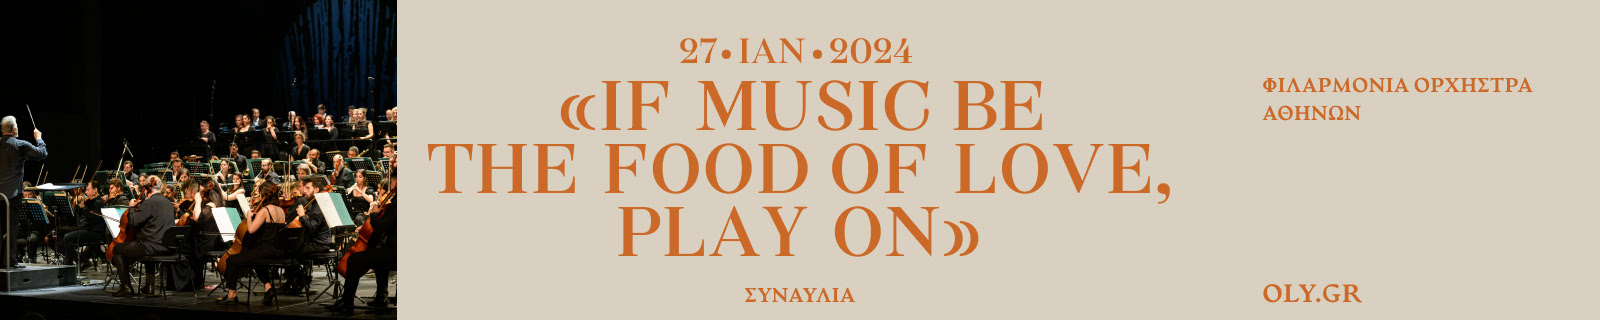 19. IF MUSIC BE THE FOOD OF LOVE_HEADER.jpg